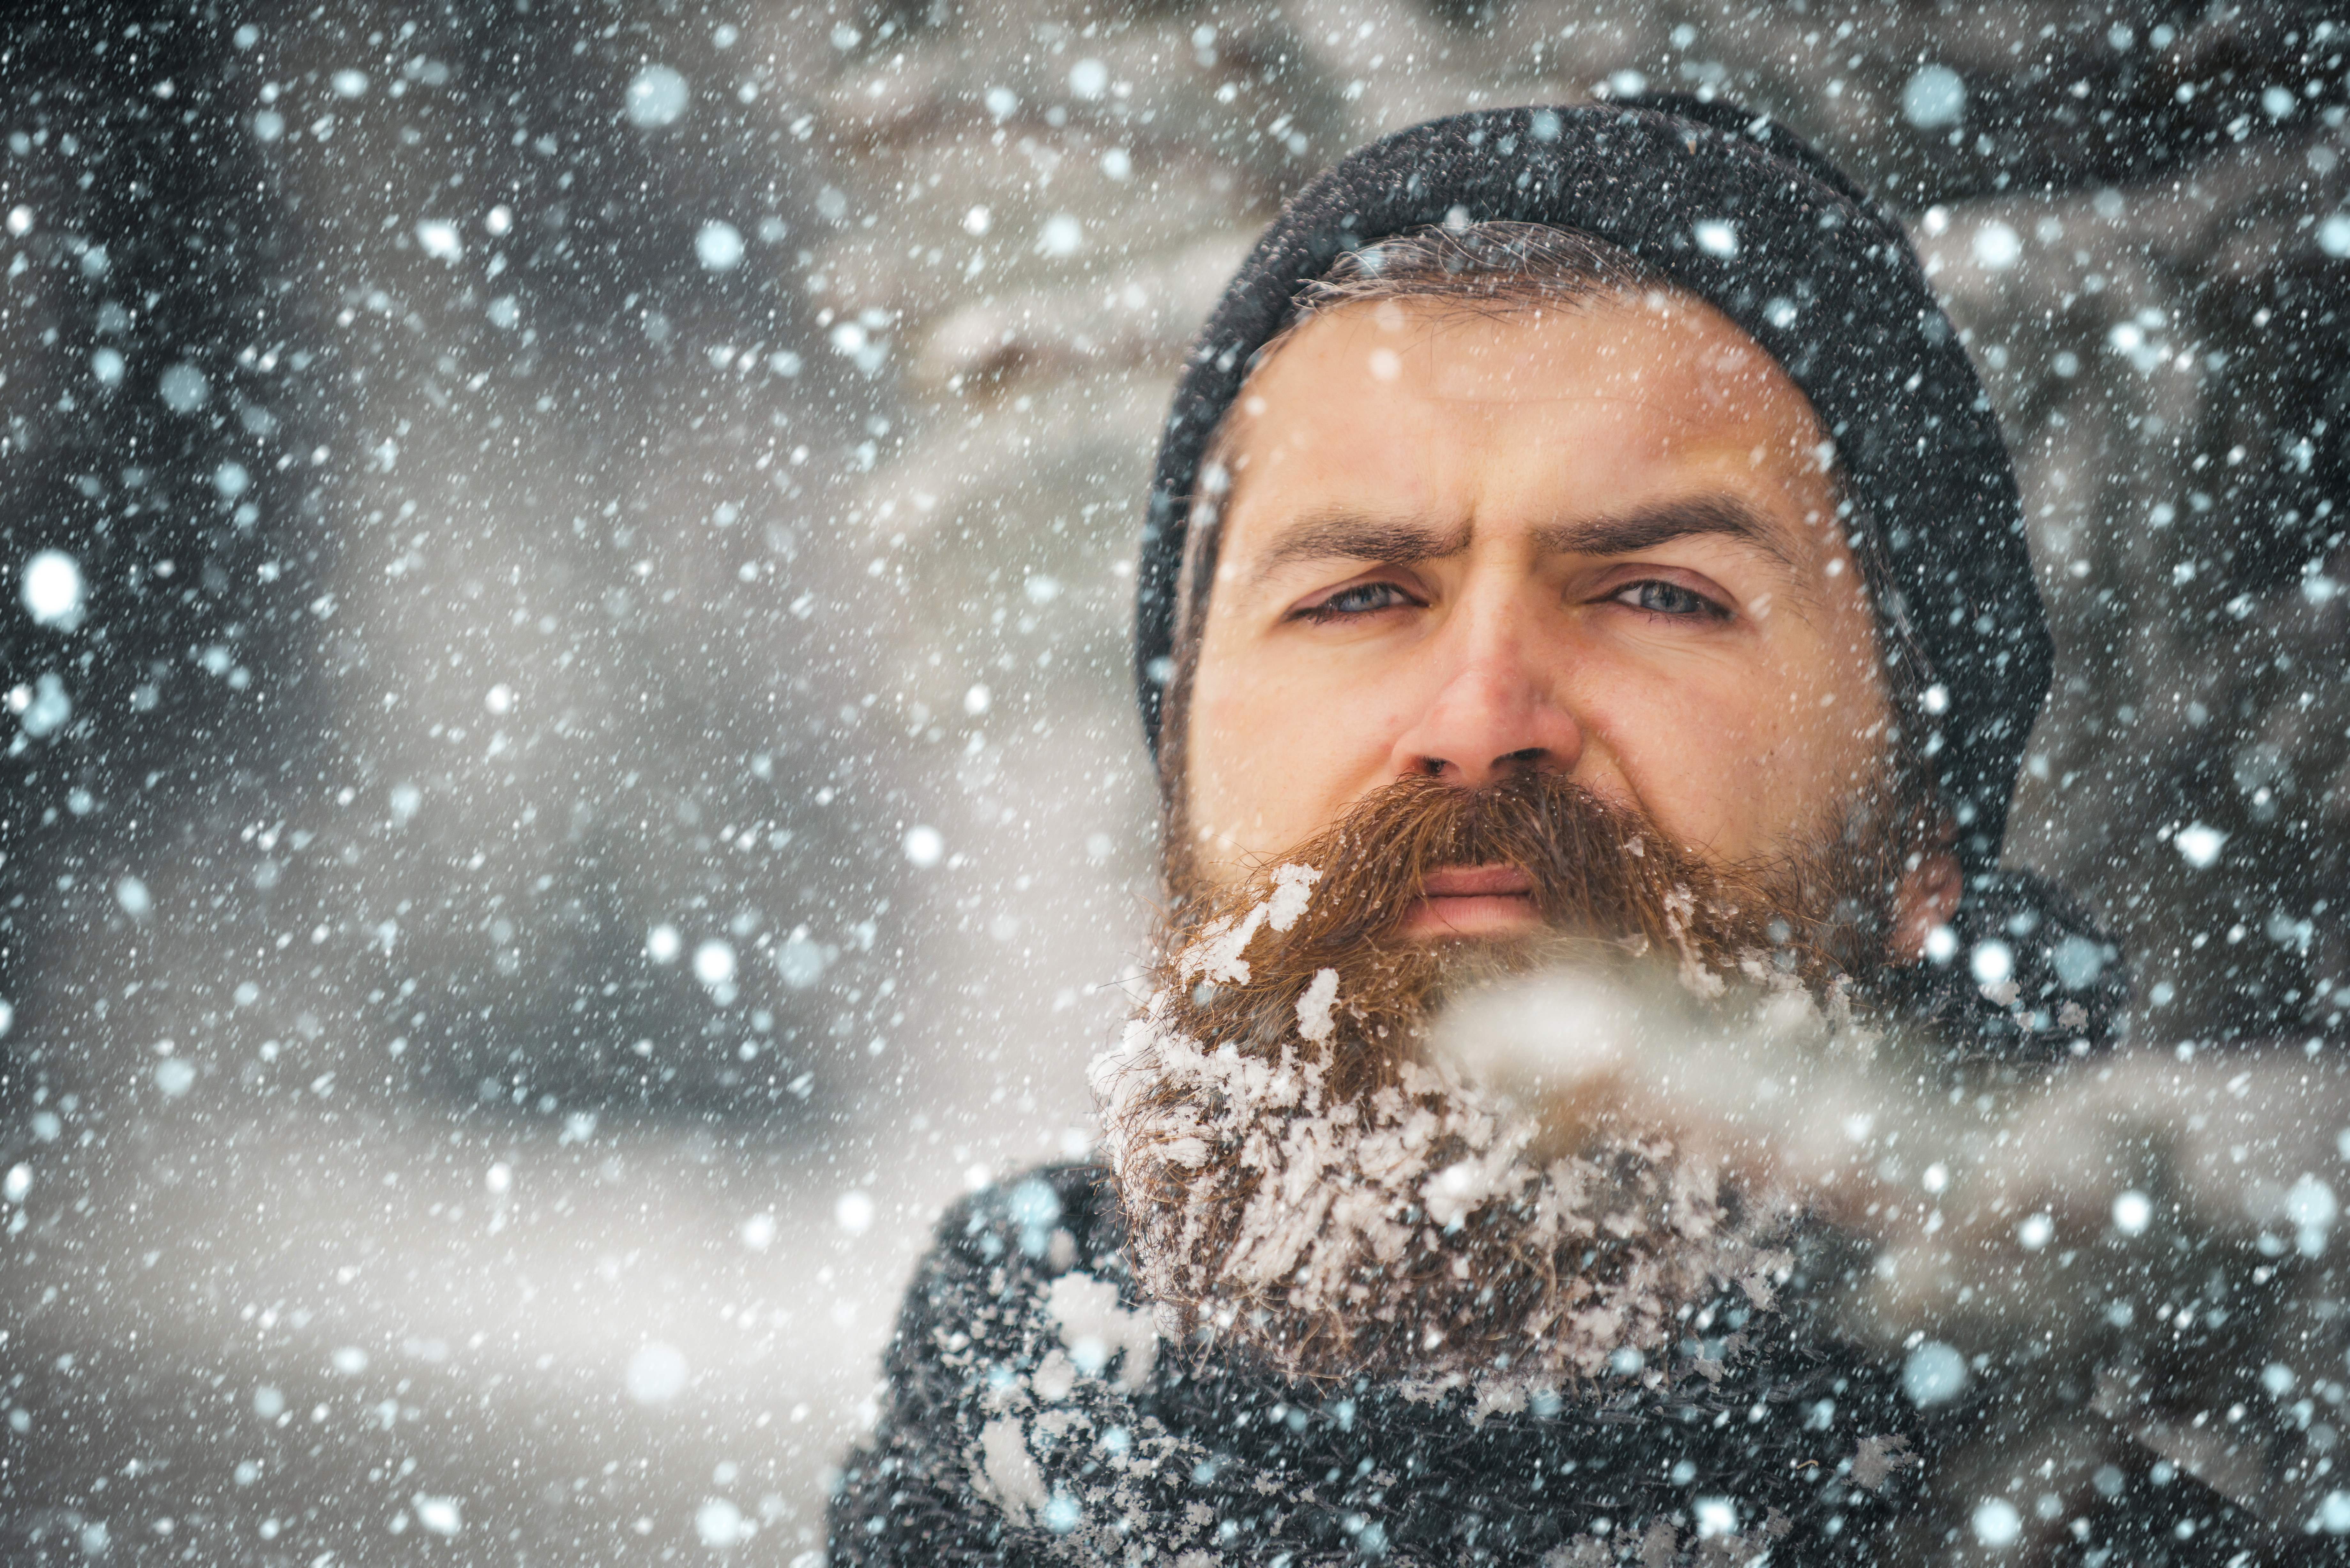 A man with a beard and hat, standing outside as snow falls | Source: Shutterstock